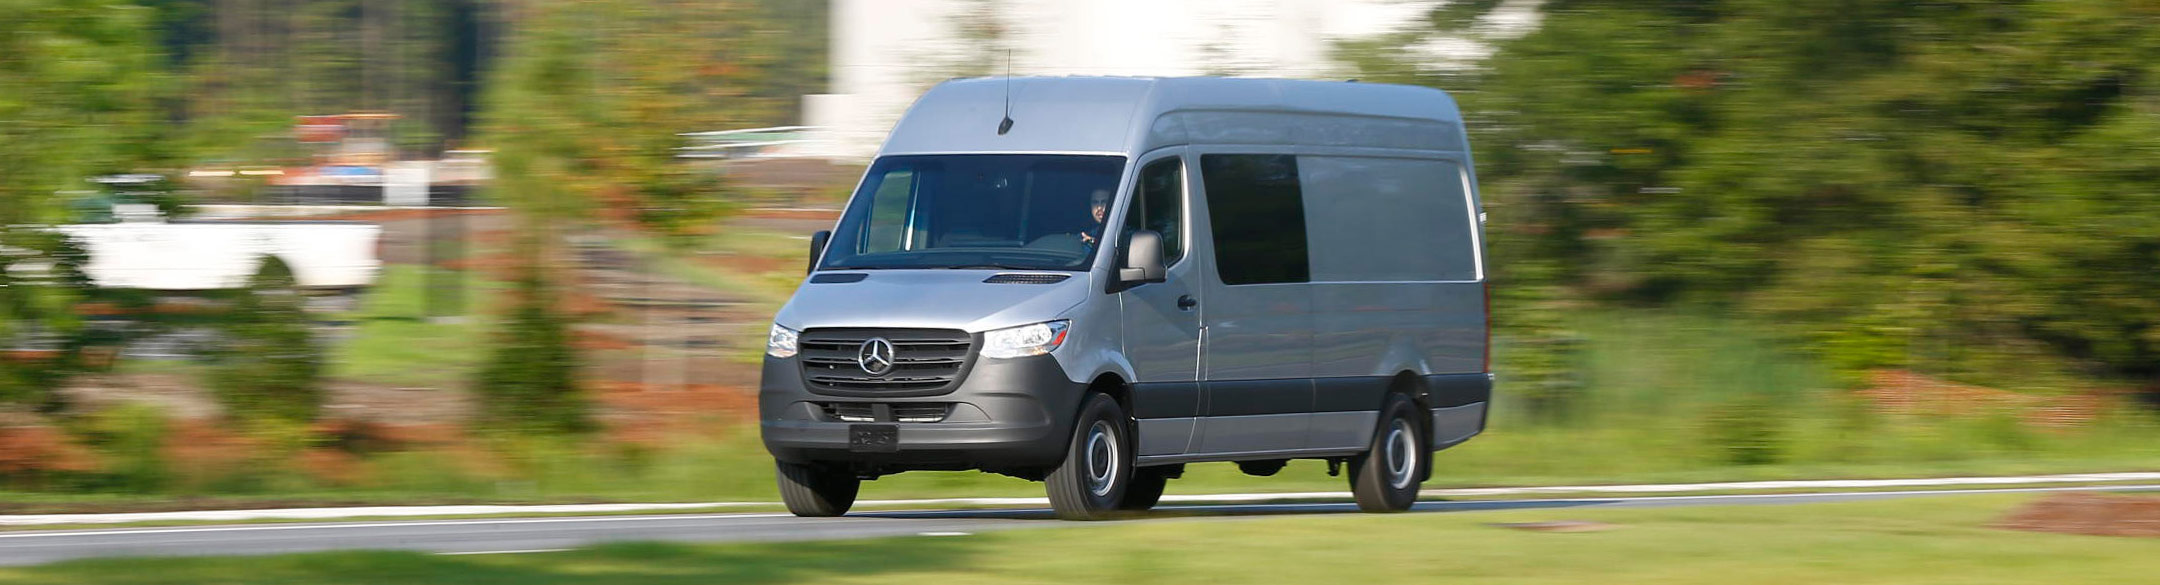 Mercedes Benz Sprinter on the road